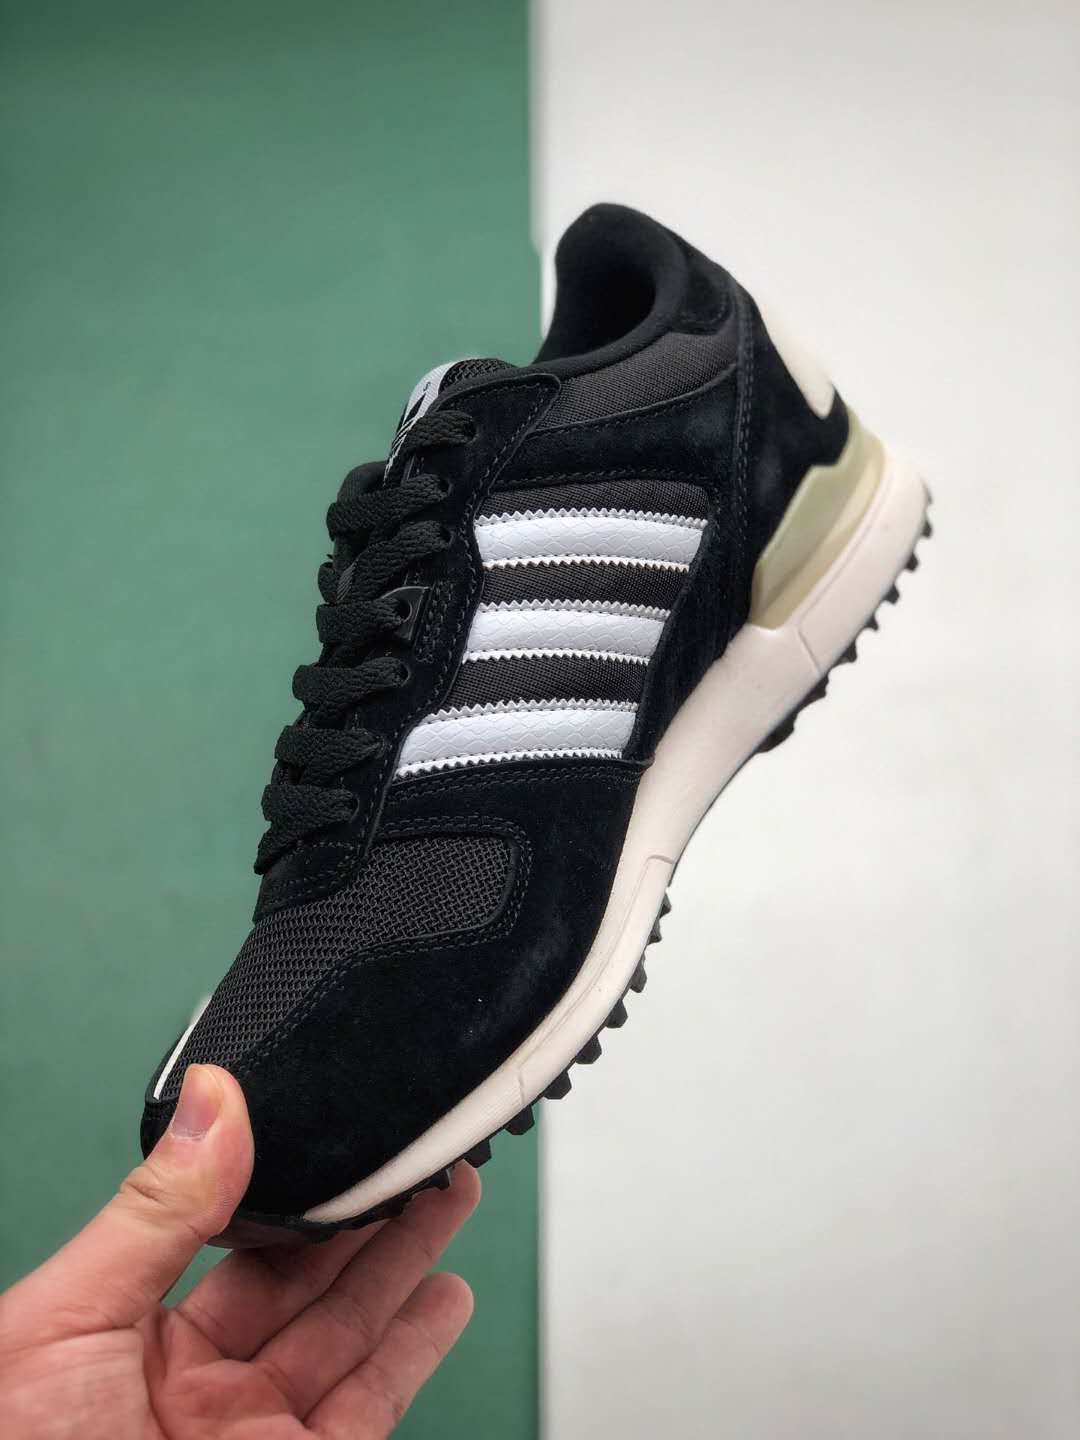 Adidas ZX 700 Black White B24842: Classic Style and Unmatched Comfort